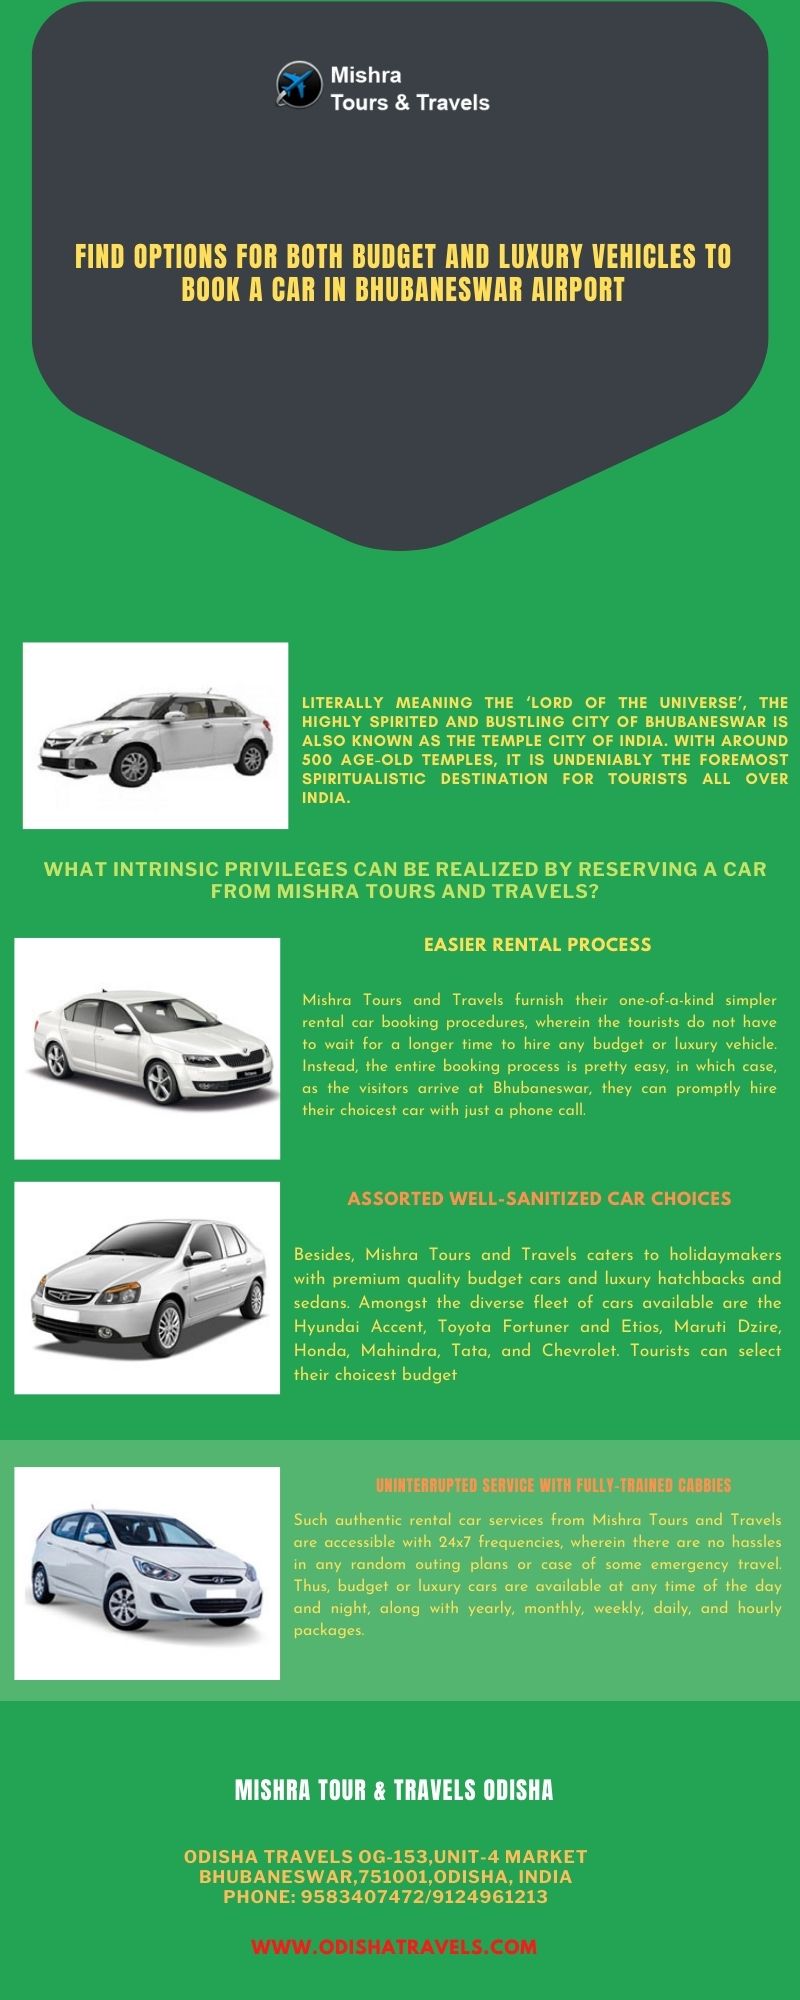 Find options for both budget and luxury vehicles to Book a car in Bhubaneswar  Mishra Tours and Travels caters to budget cars and luxury sedans and hatchbacks along with instant pickups and drop-ins to Book a car in Bhubaneswar Airport. For more details, visit: https://www.odishatravels.com/taxi-service-in-bhubaneswar
 by Odishatravels